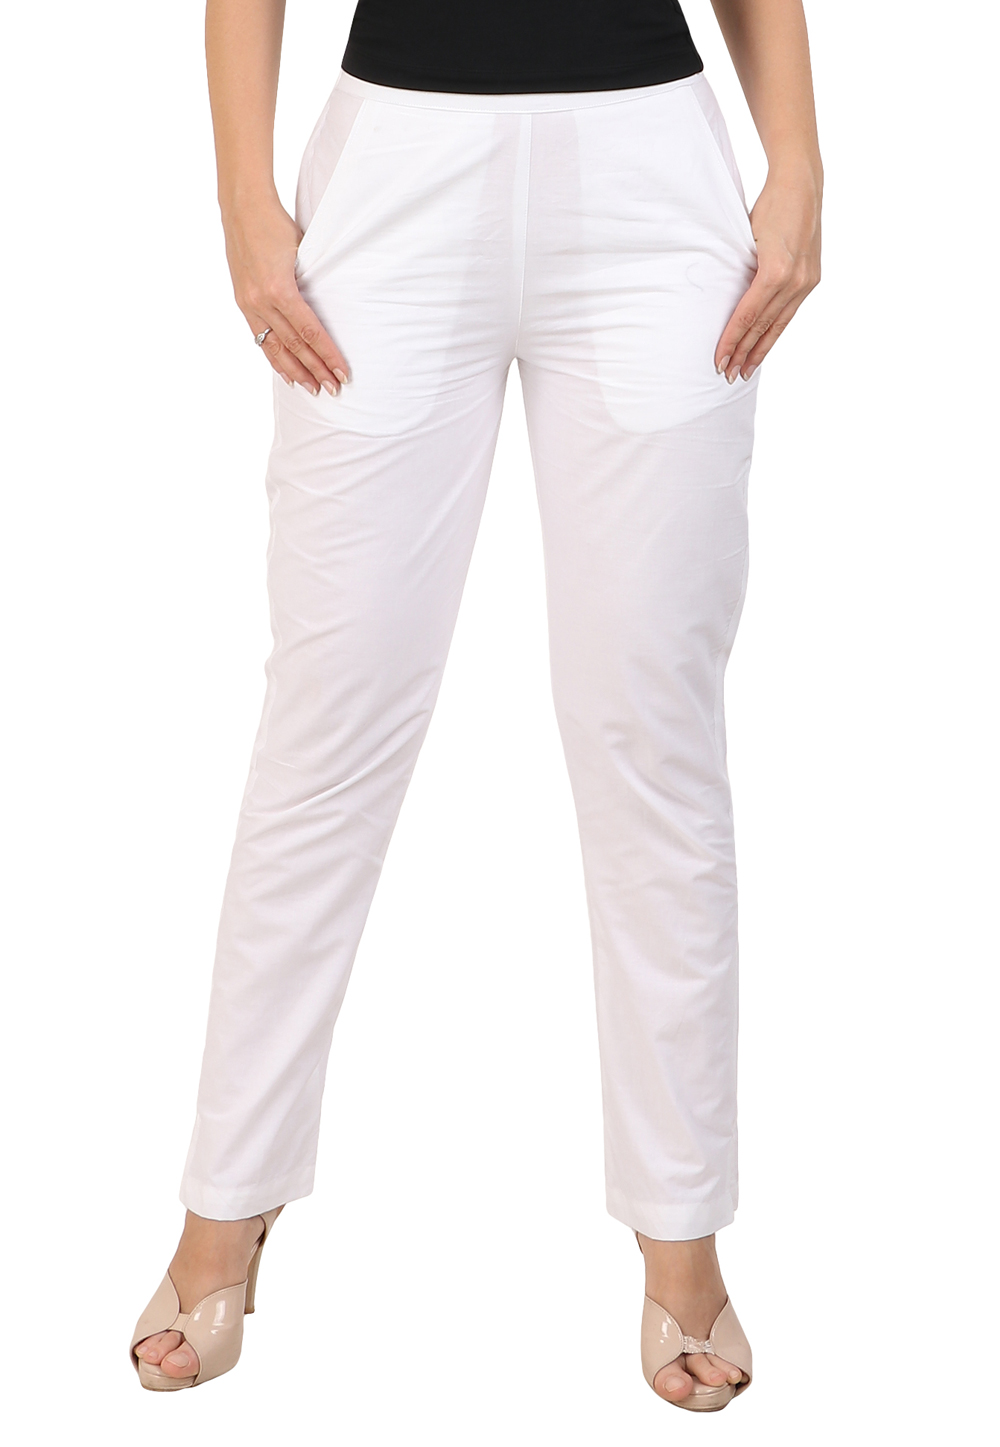 Buy White Pants/ Pants Women/ Red Wrap Pants/ Casual Pants/ Cotton Pants/  Loose Cotton Pants/ Cotton Trousers/ Pockets/ White Pants/ Summer Online in  India - Etsy